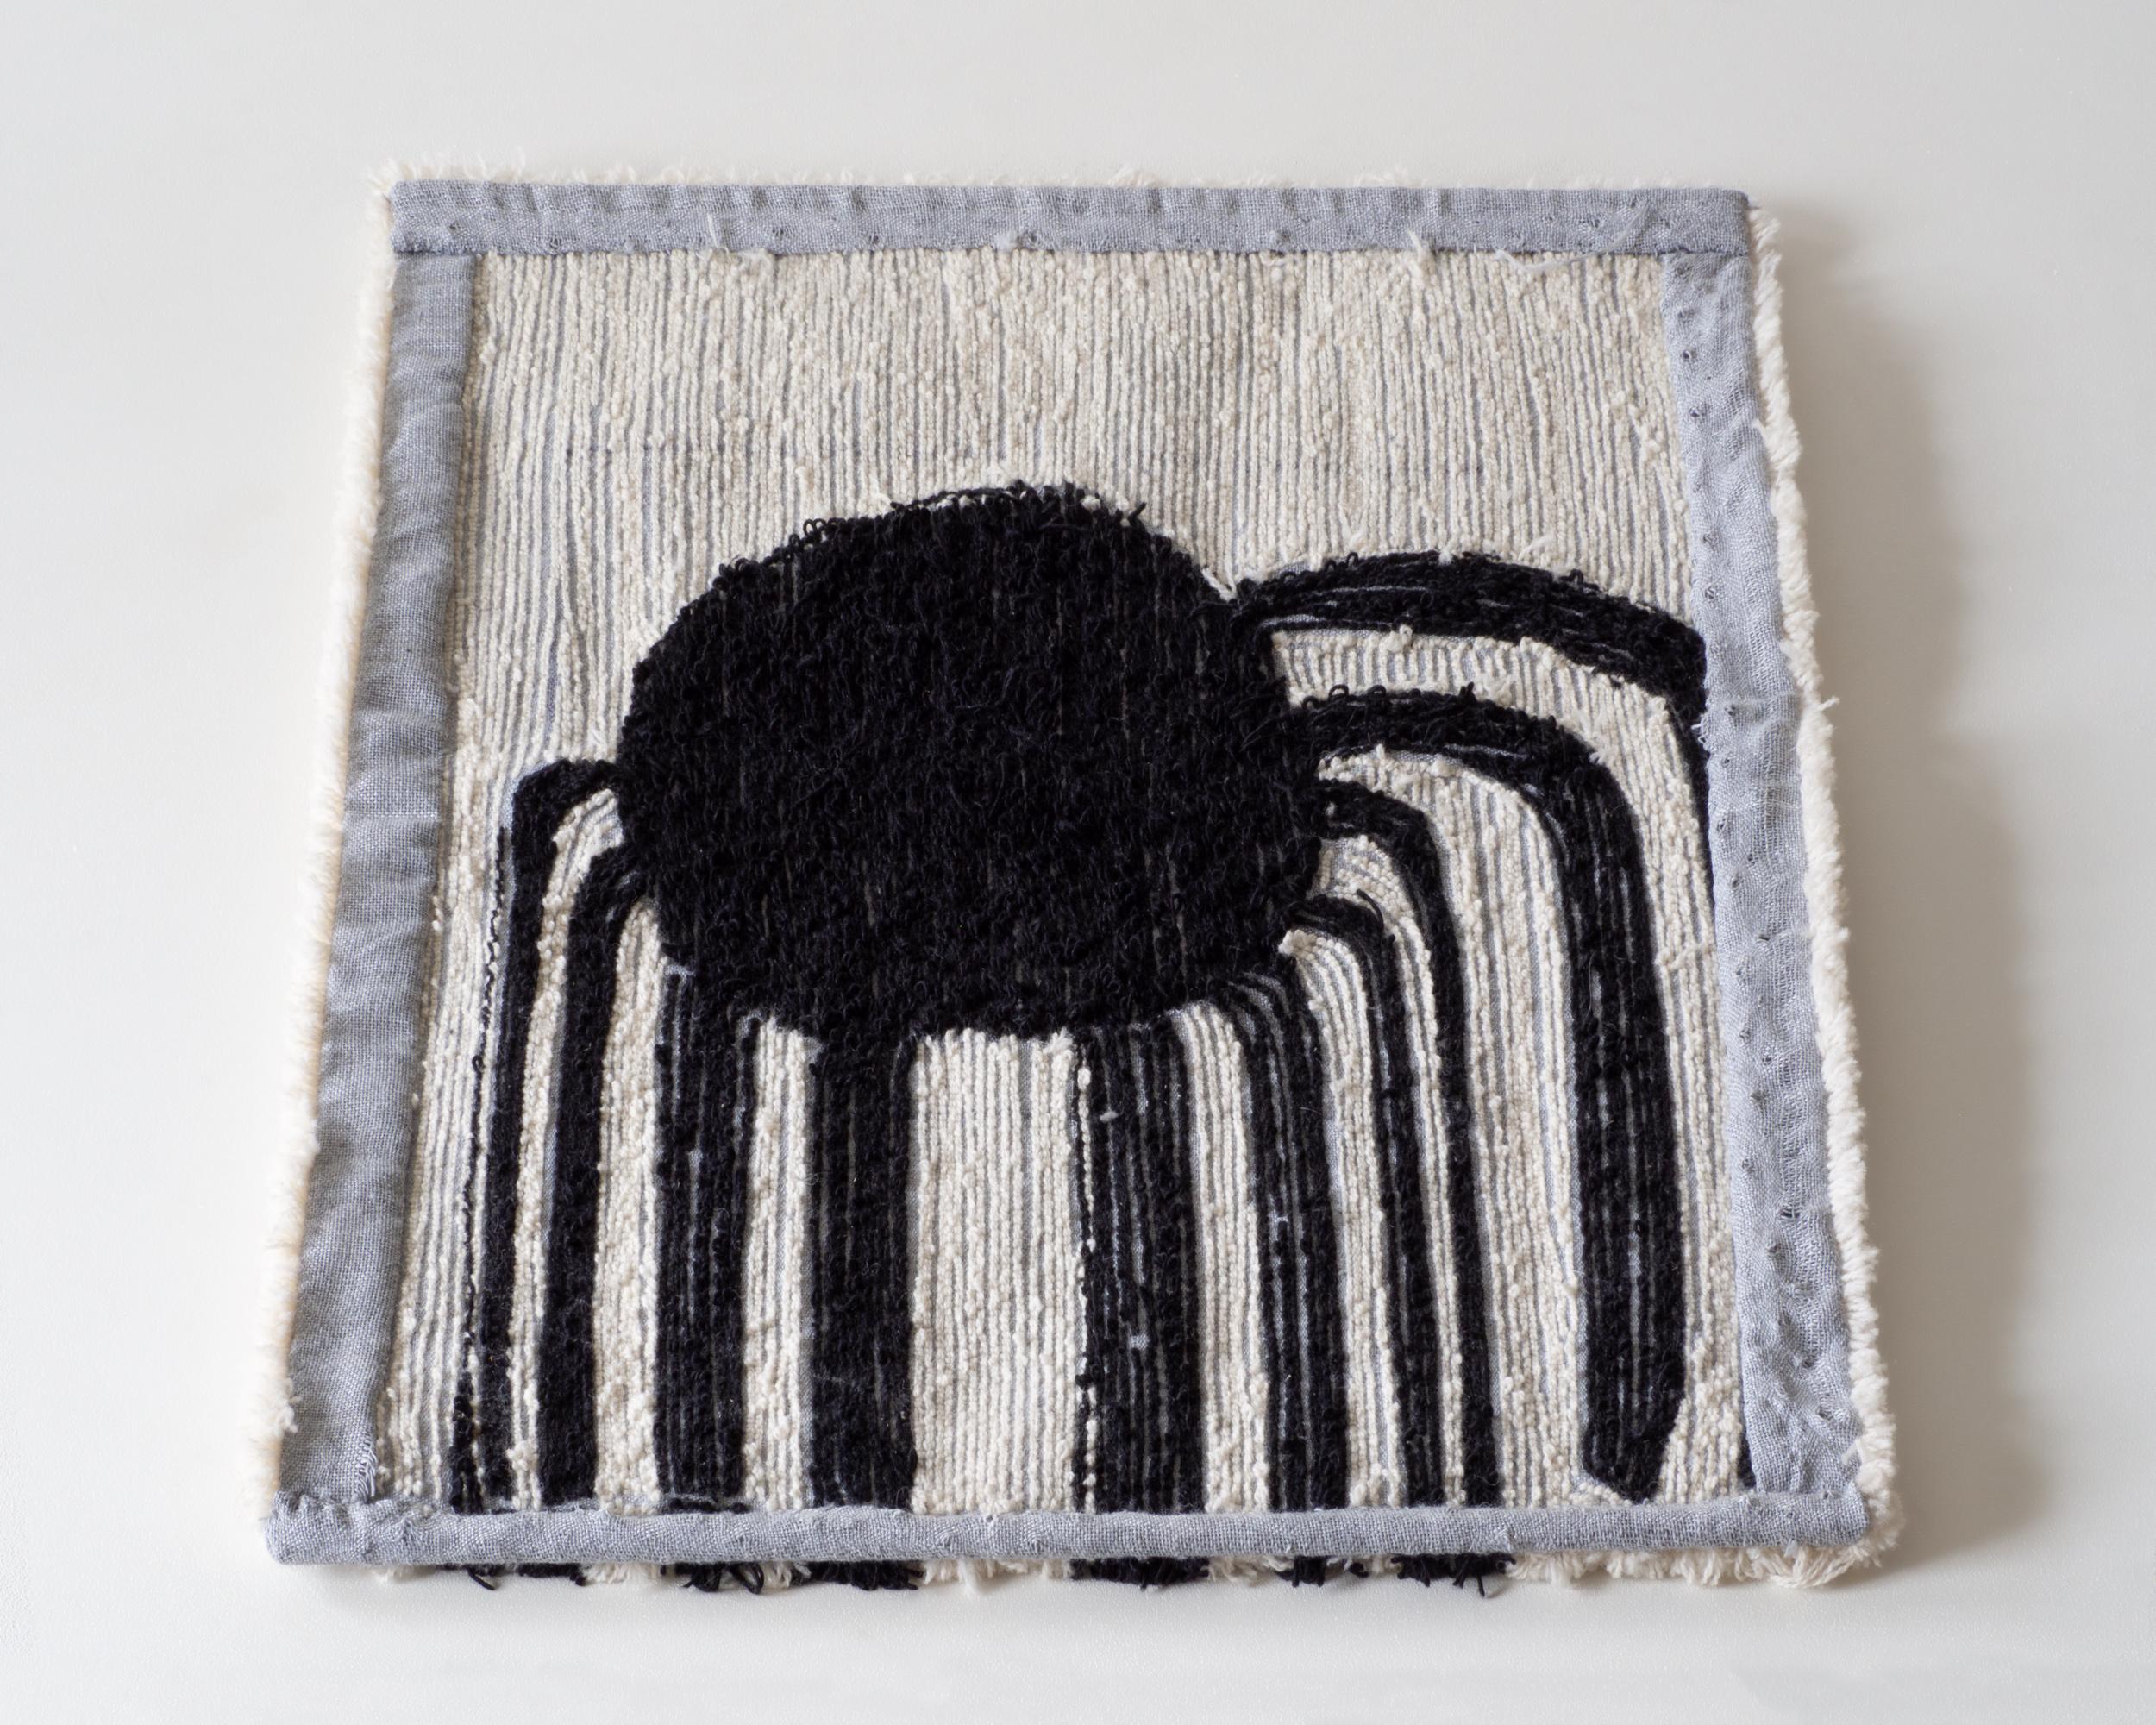 Intruder – Wall Tapestry Contemporary Textile Art Piece by Andréason & Leibel In New Condition For Sale In Arlöv, SE